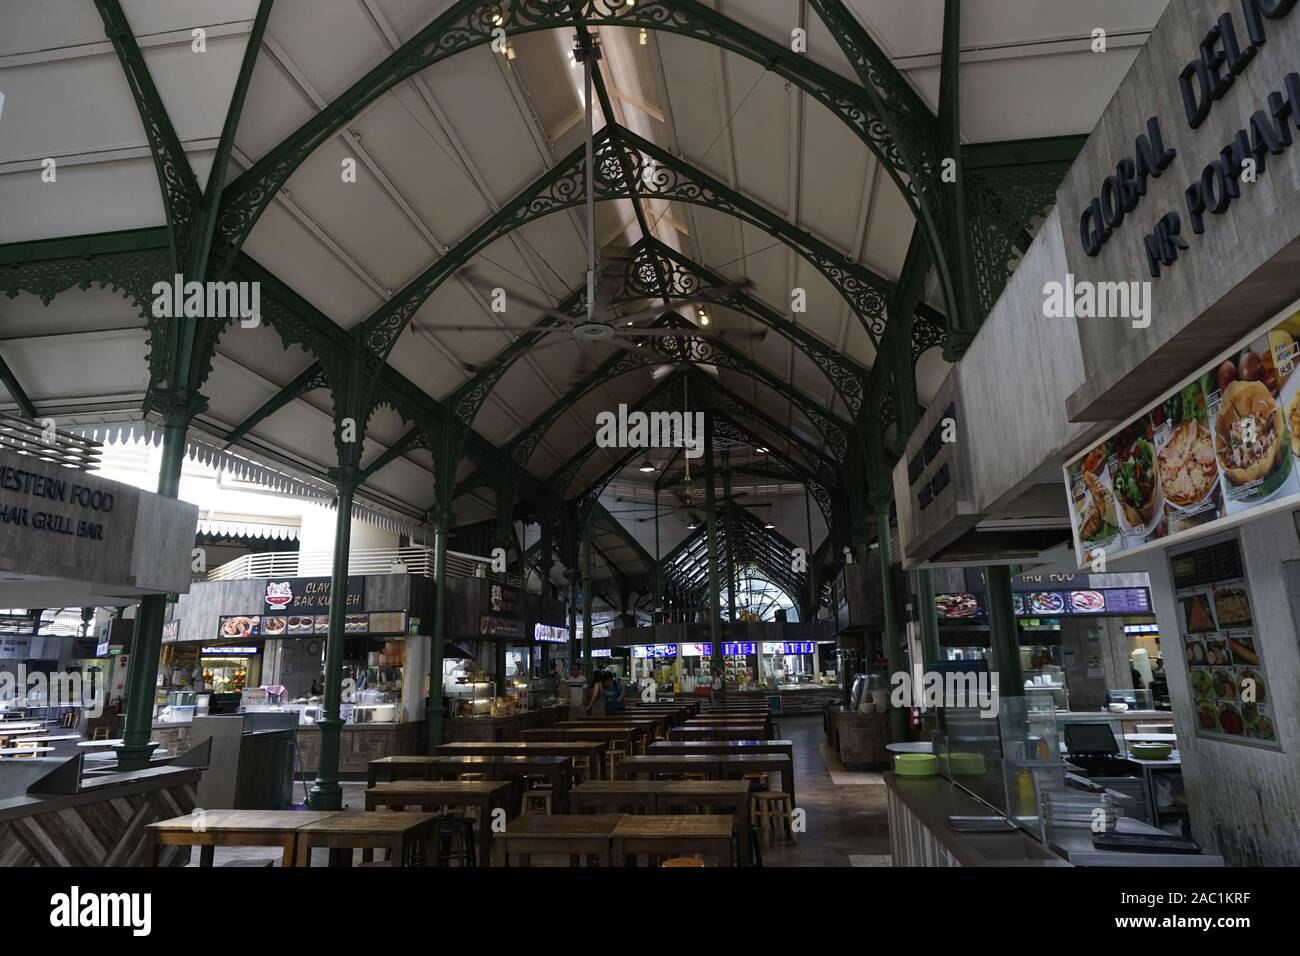 Lau Pa Sat hawker centre, also known as Telok Ayer Market, is a historic building located within the Downtown Central Area of Singapore. Stock Photo